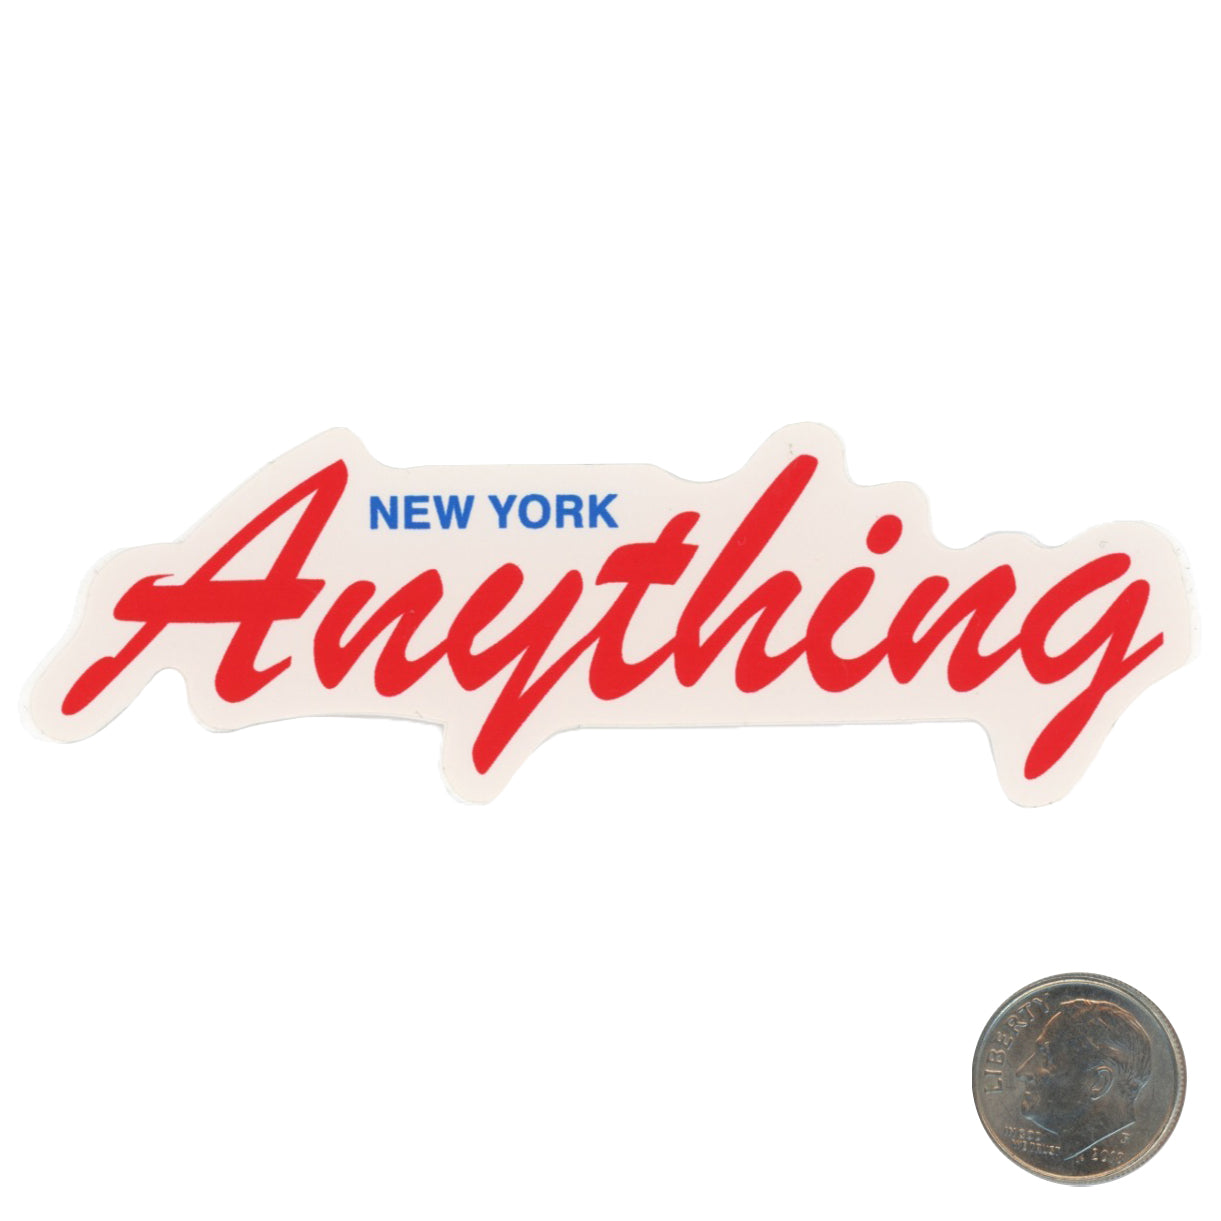 Anything New York Script Logo Red Sticker with dime